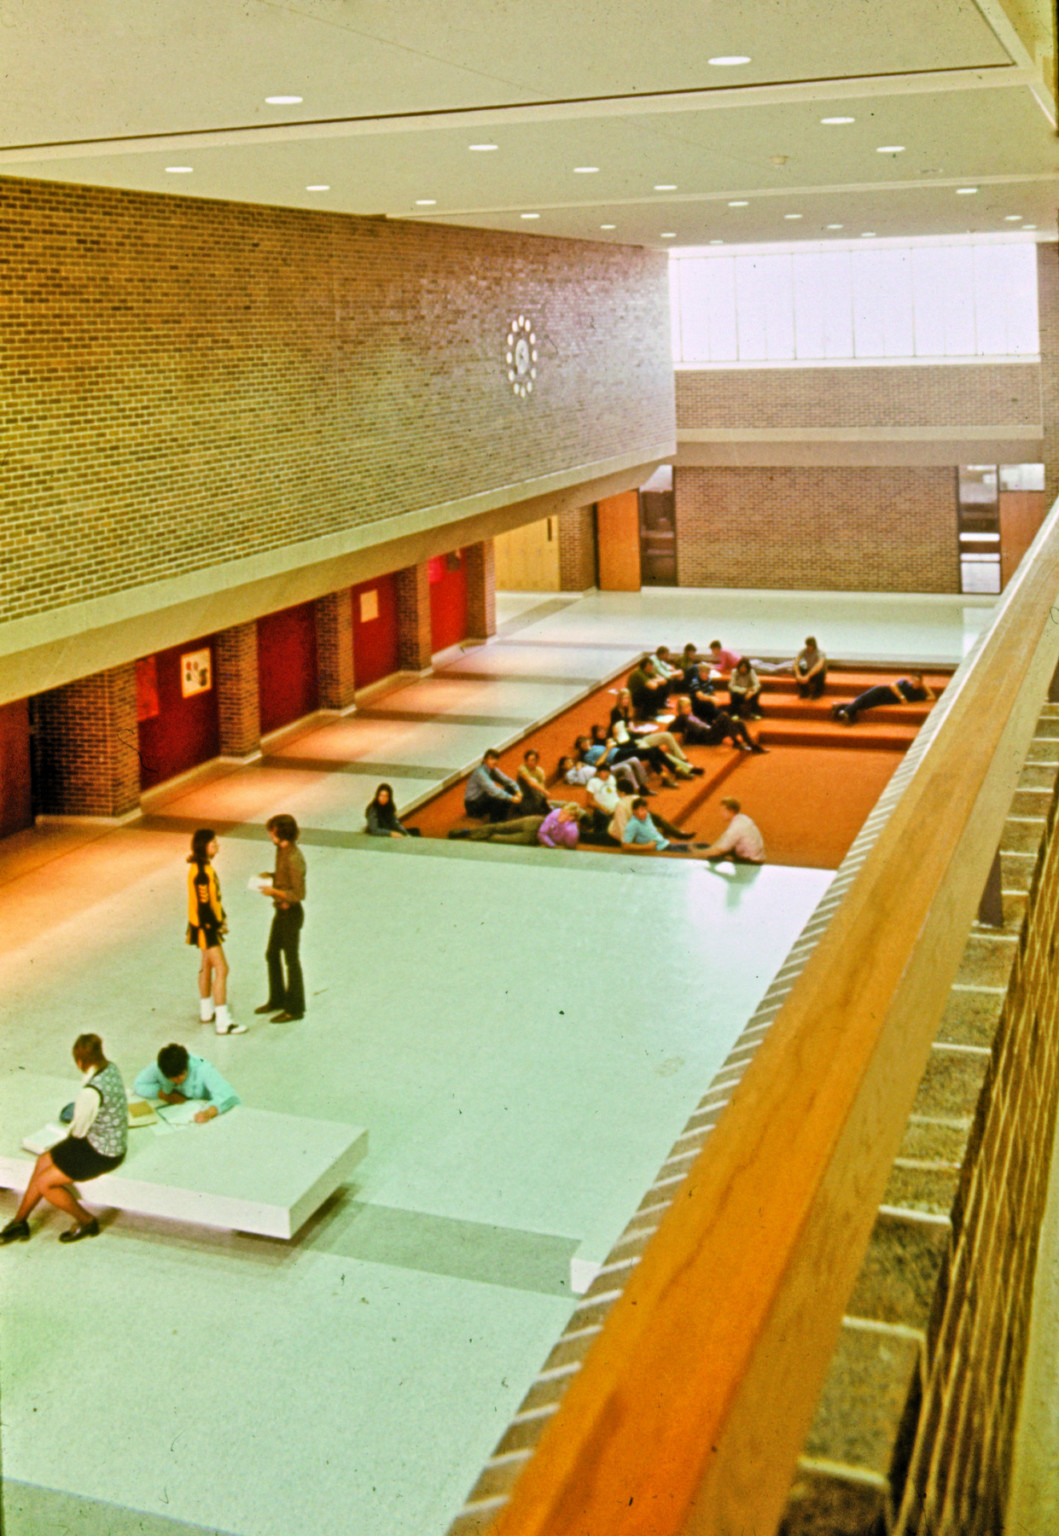 Bryan High School in Omaha, looking down on first floor with red and brick walls. Students gathered in recessed seating area